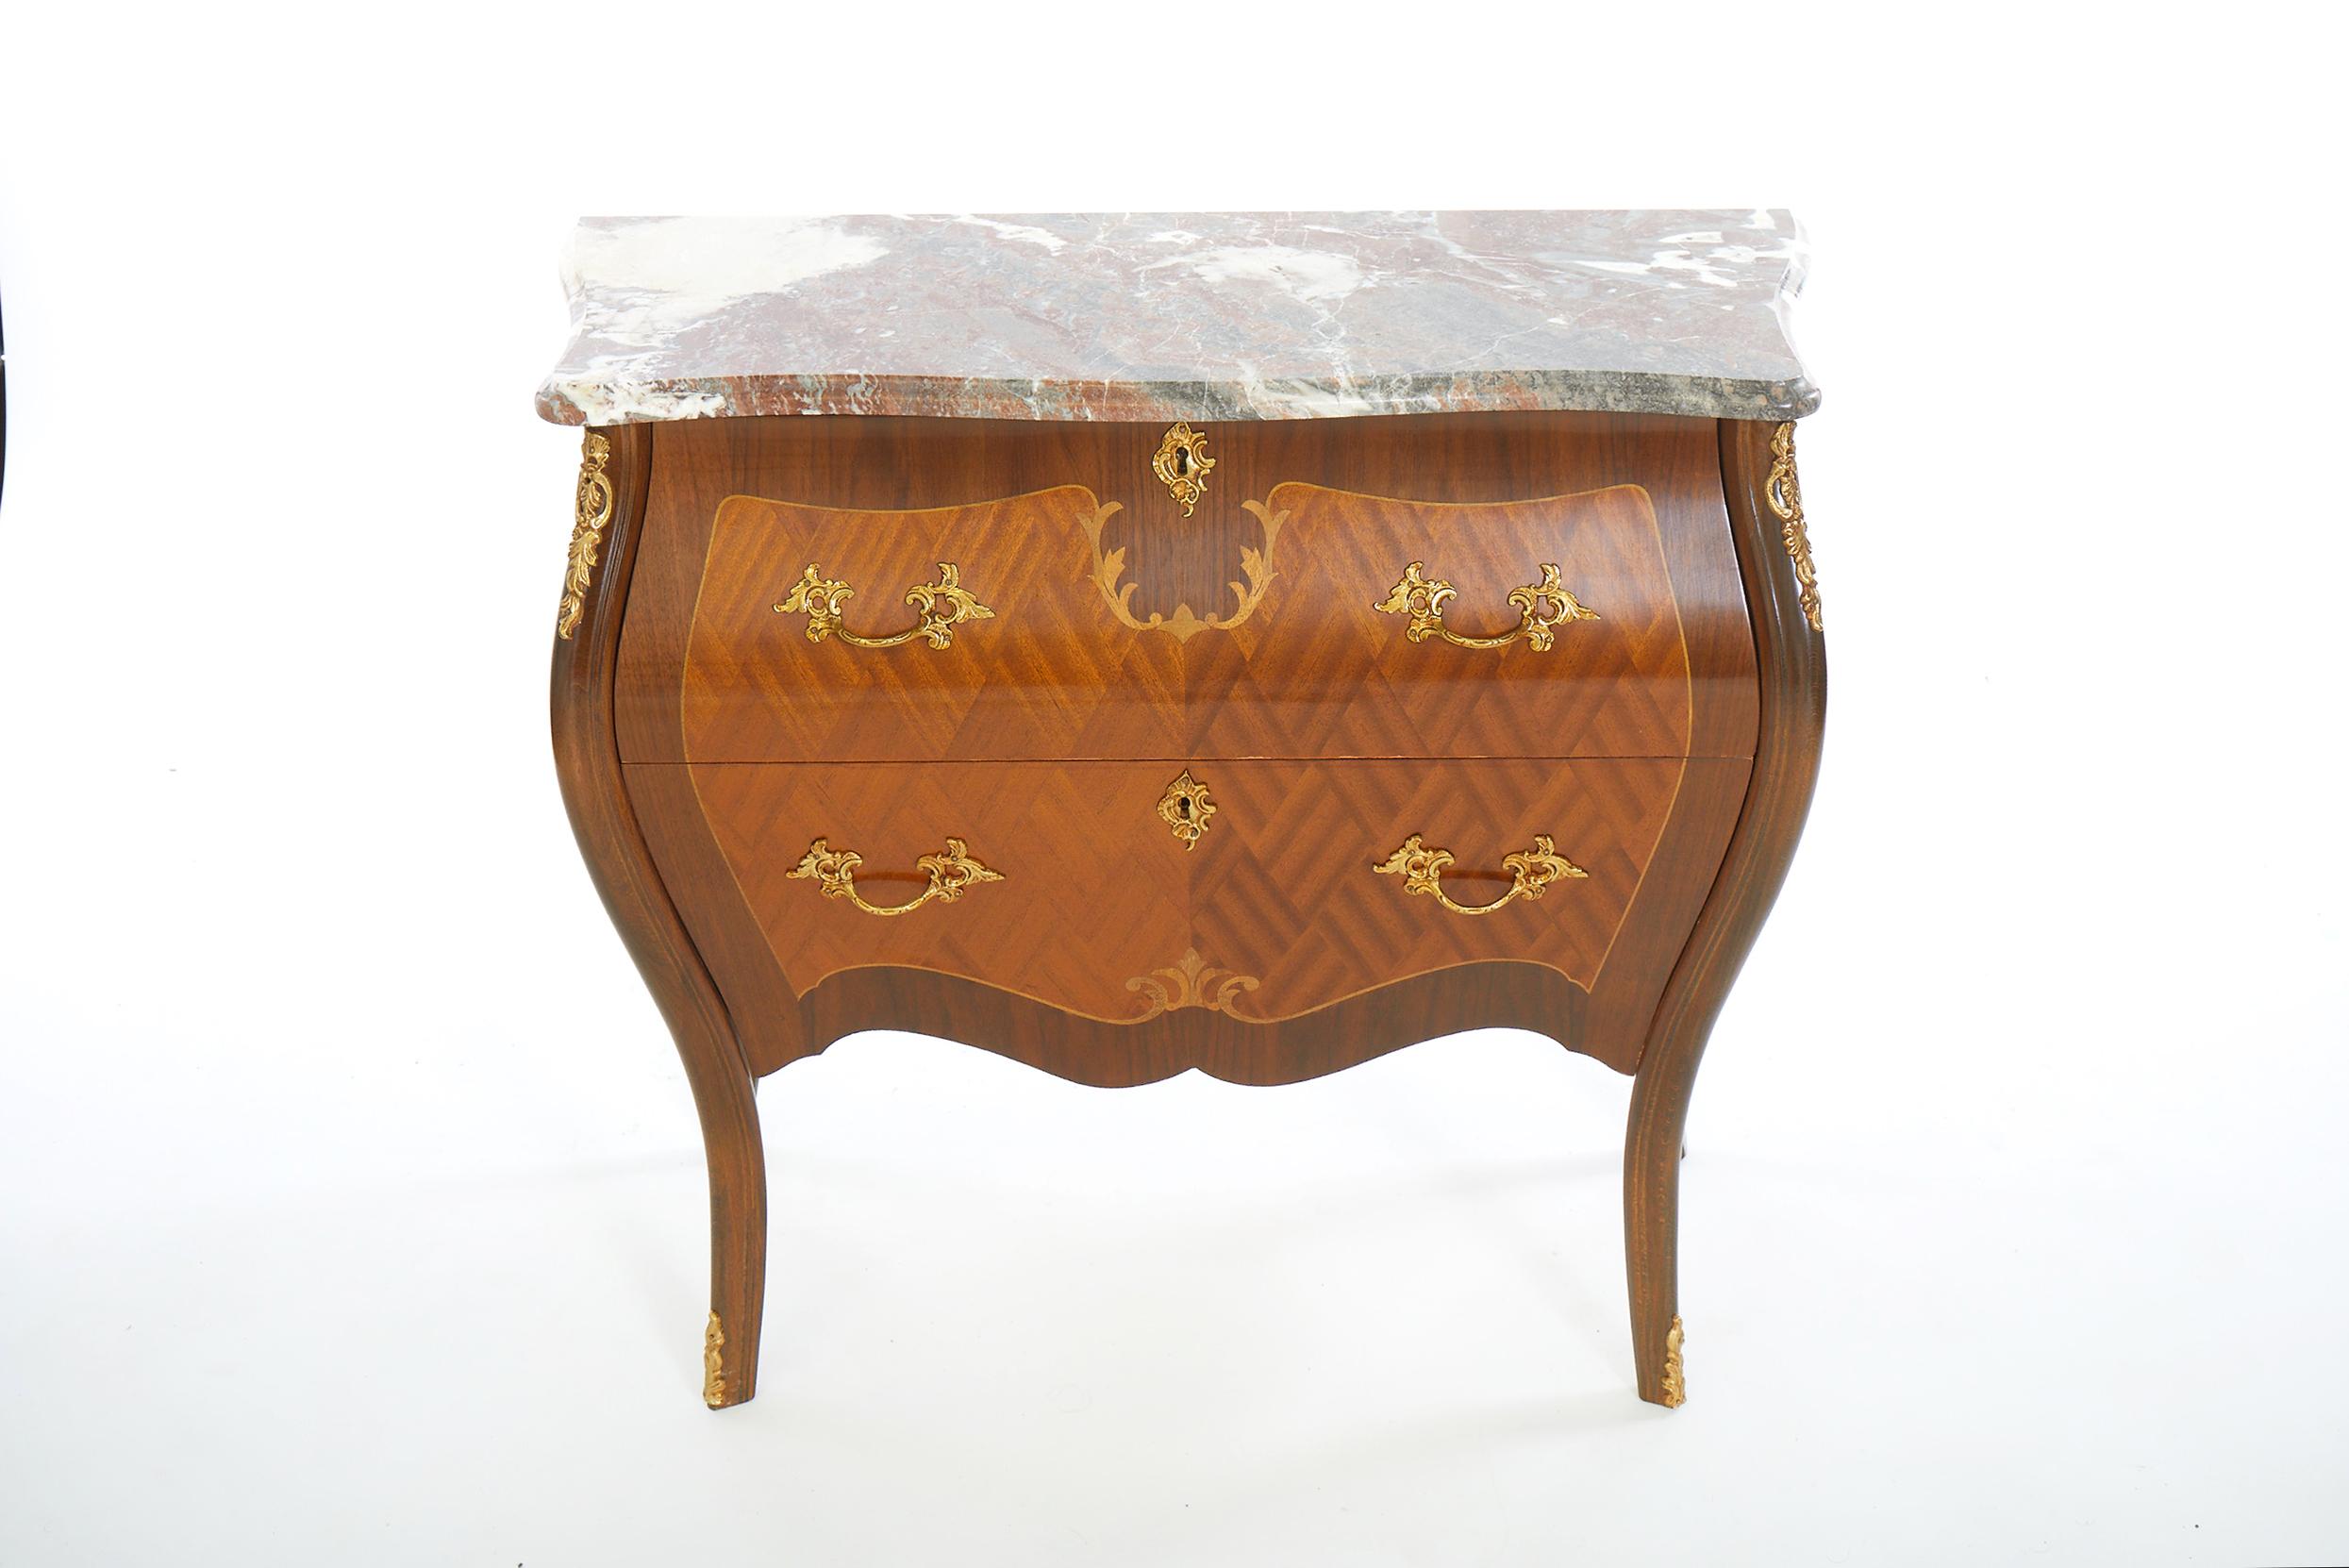 Italian parquetry inlay wood ormulu brass trim with detachable marble top bombe chest / side table. Each chest features two front pull drawer with locking keys. Each one is in great condition. Minor wear consistent with age / use. Each one stands